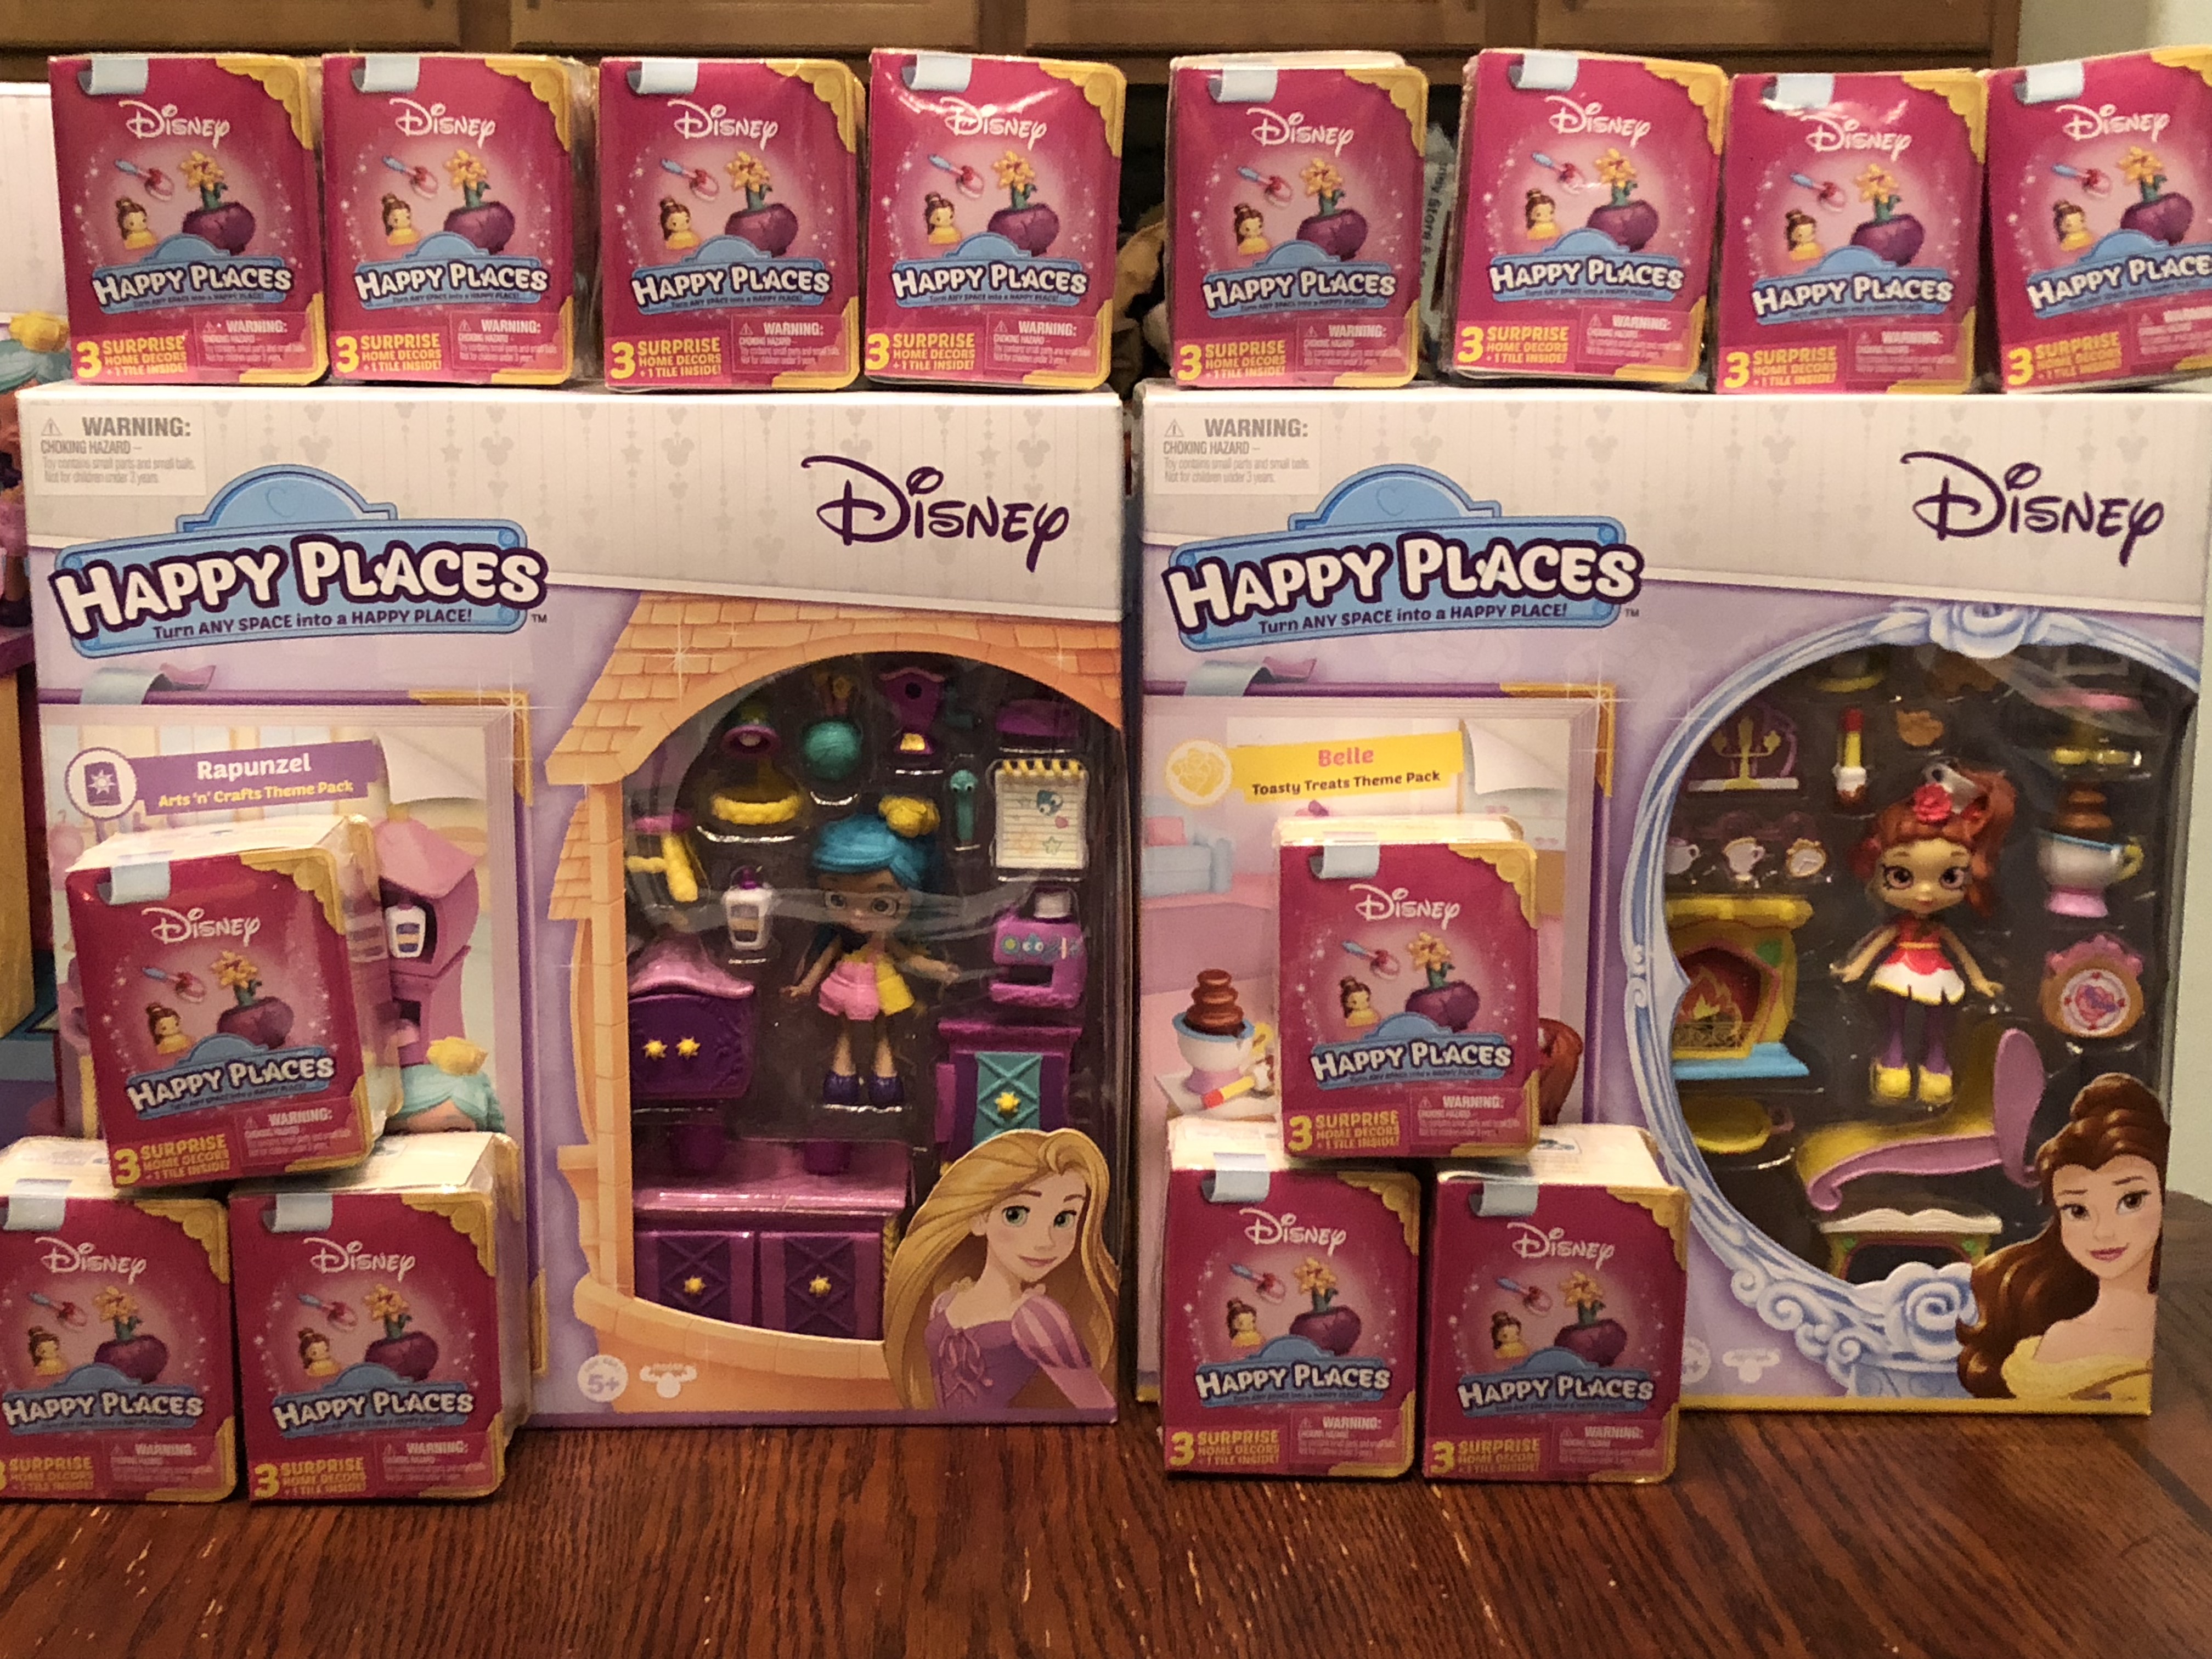 Toy Review: Disney Happy Places - Rapunzel and Belle Theme Packs